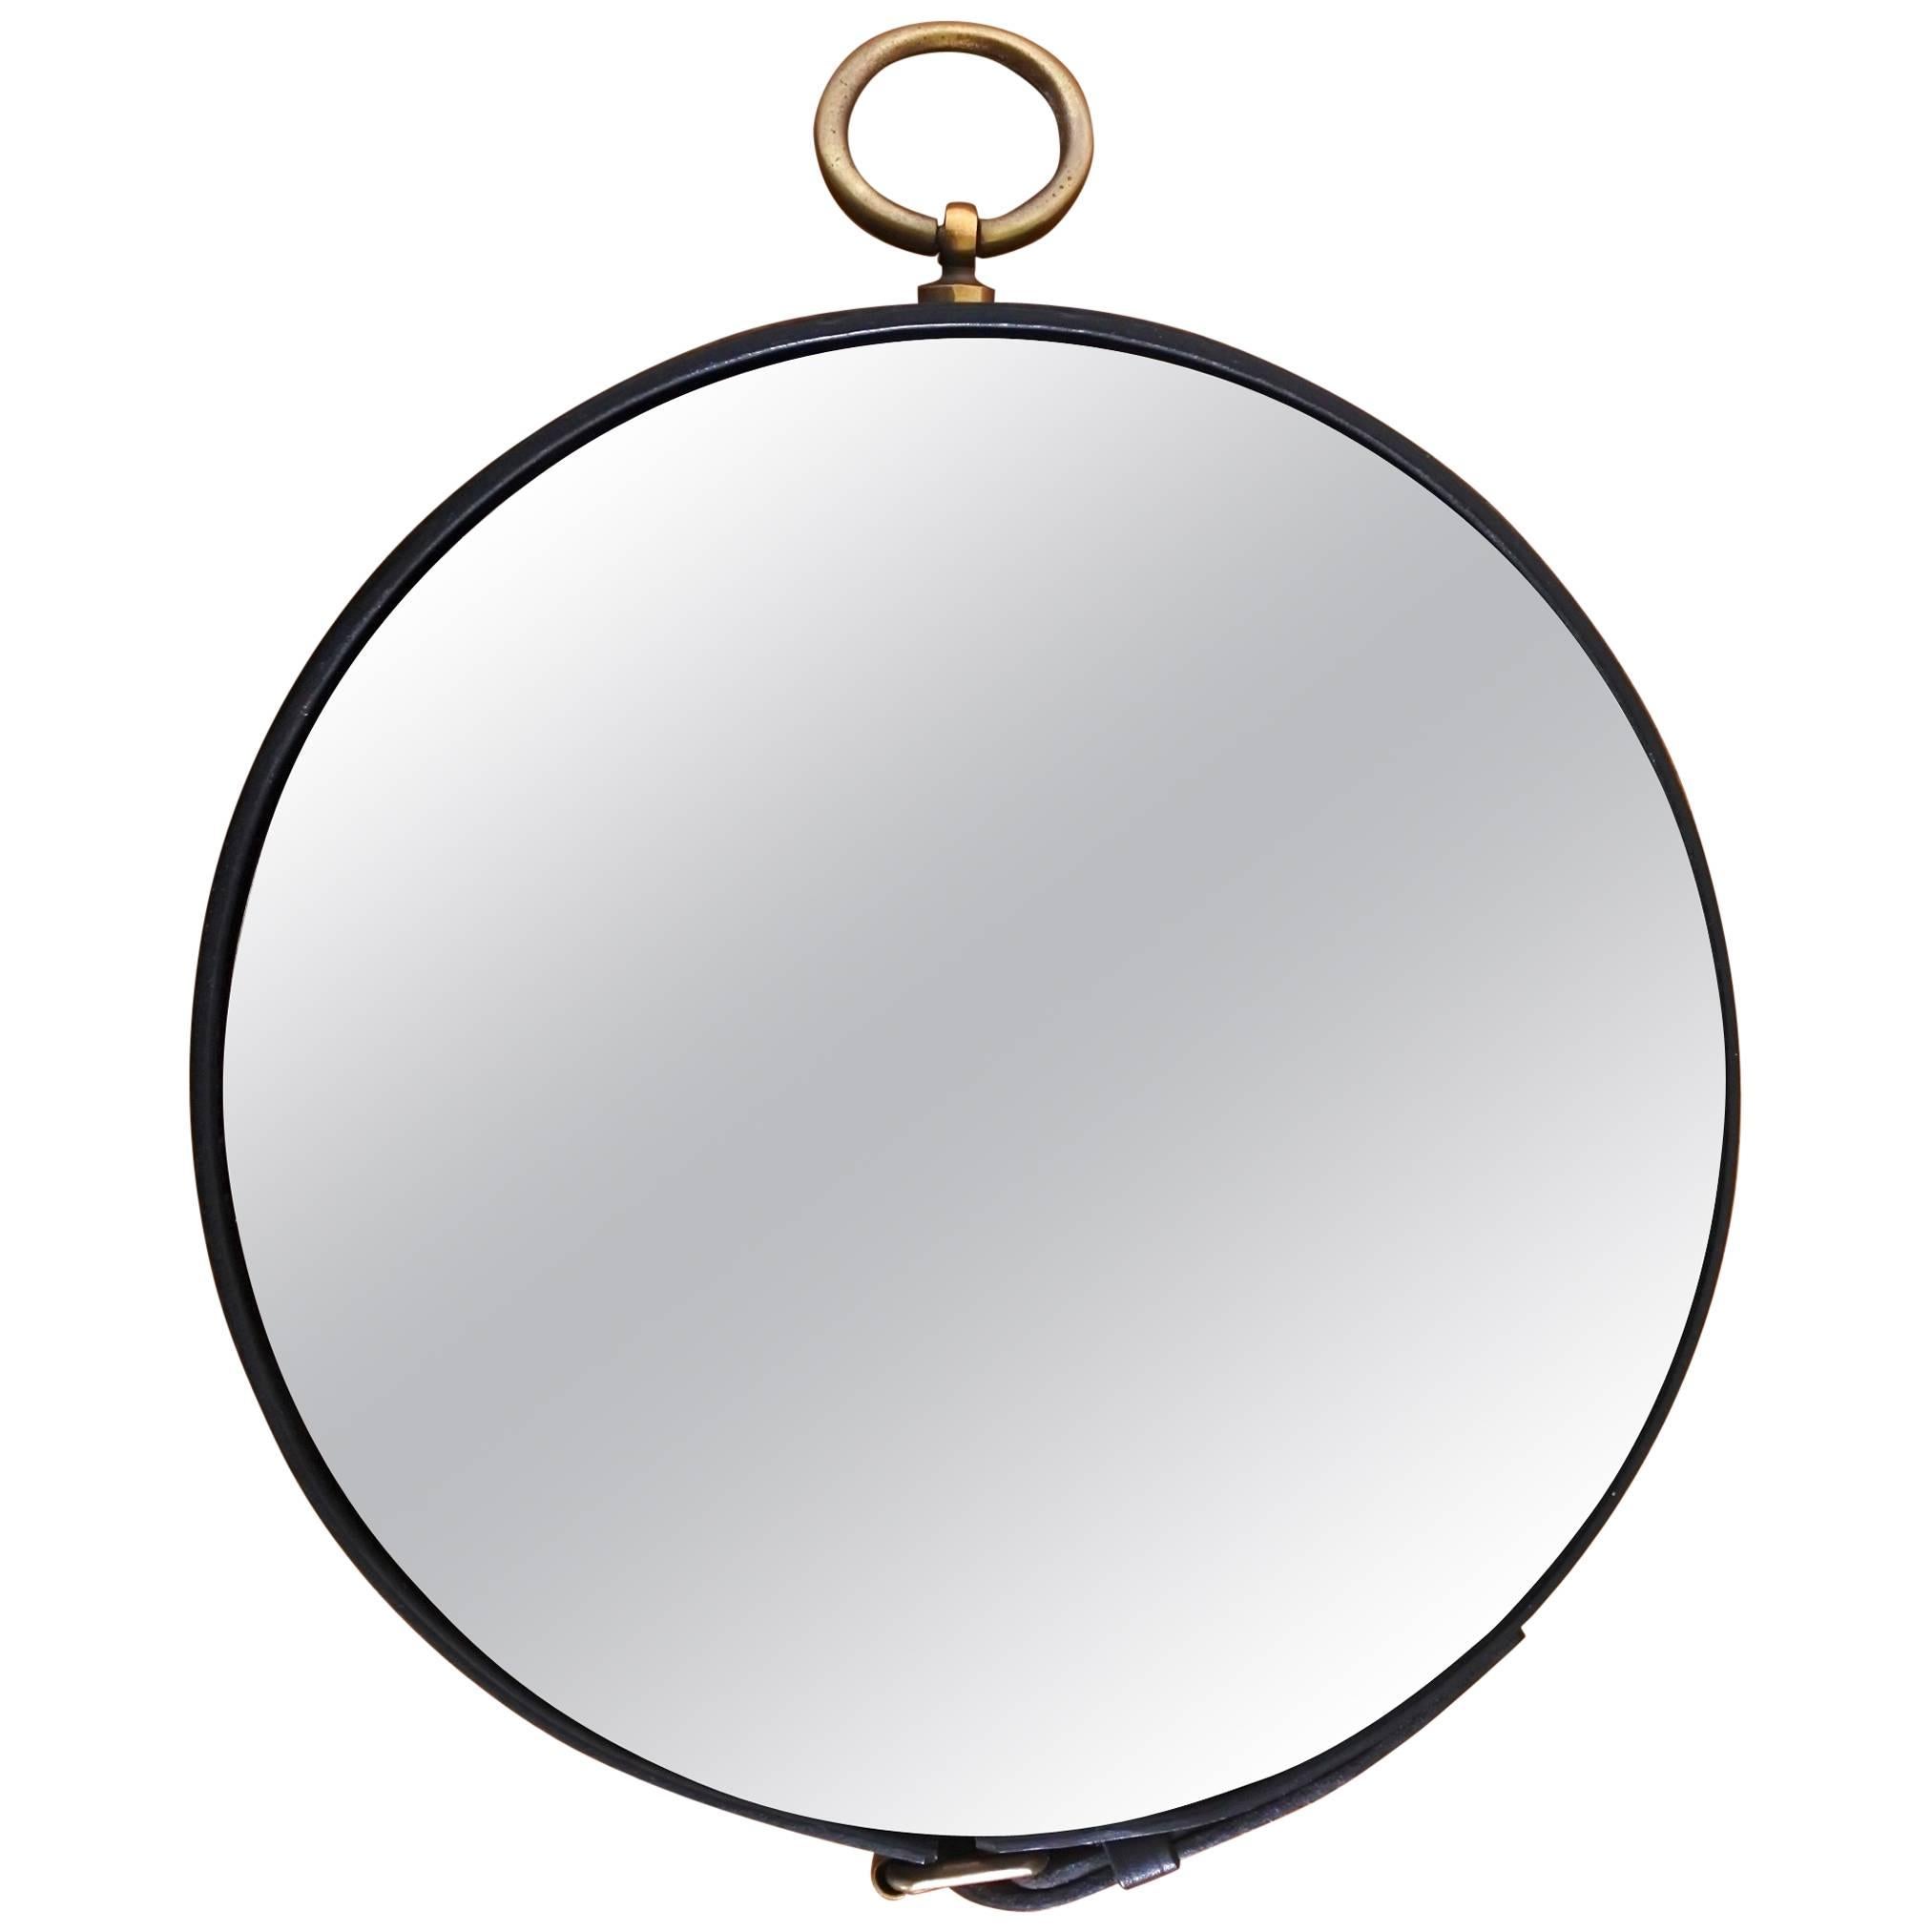 Midcentury Stitched Leather Wall Mirror Attributed to Jacques Adnet, France 1950